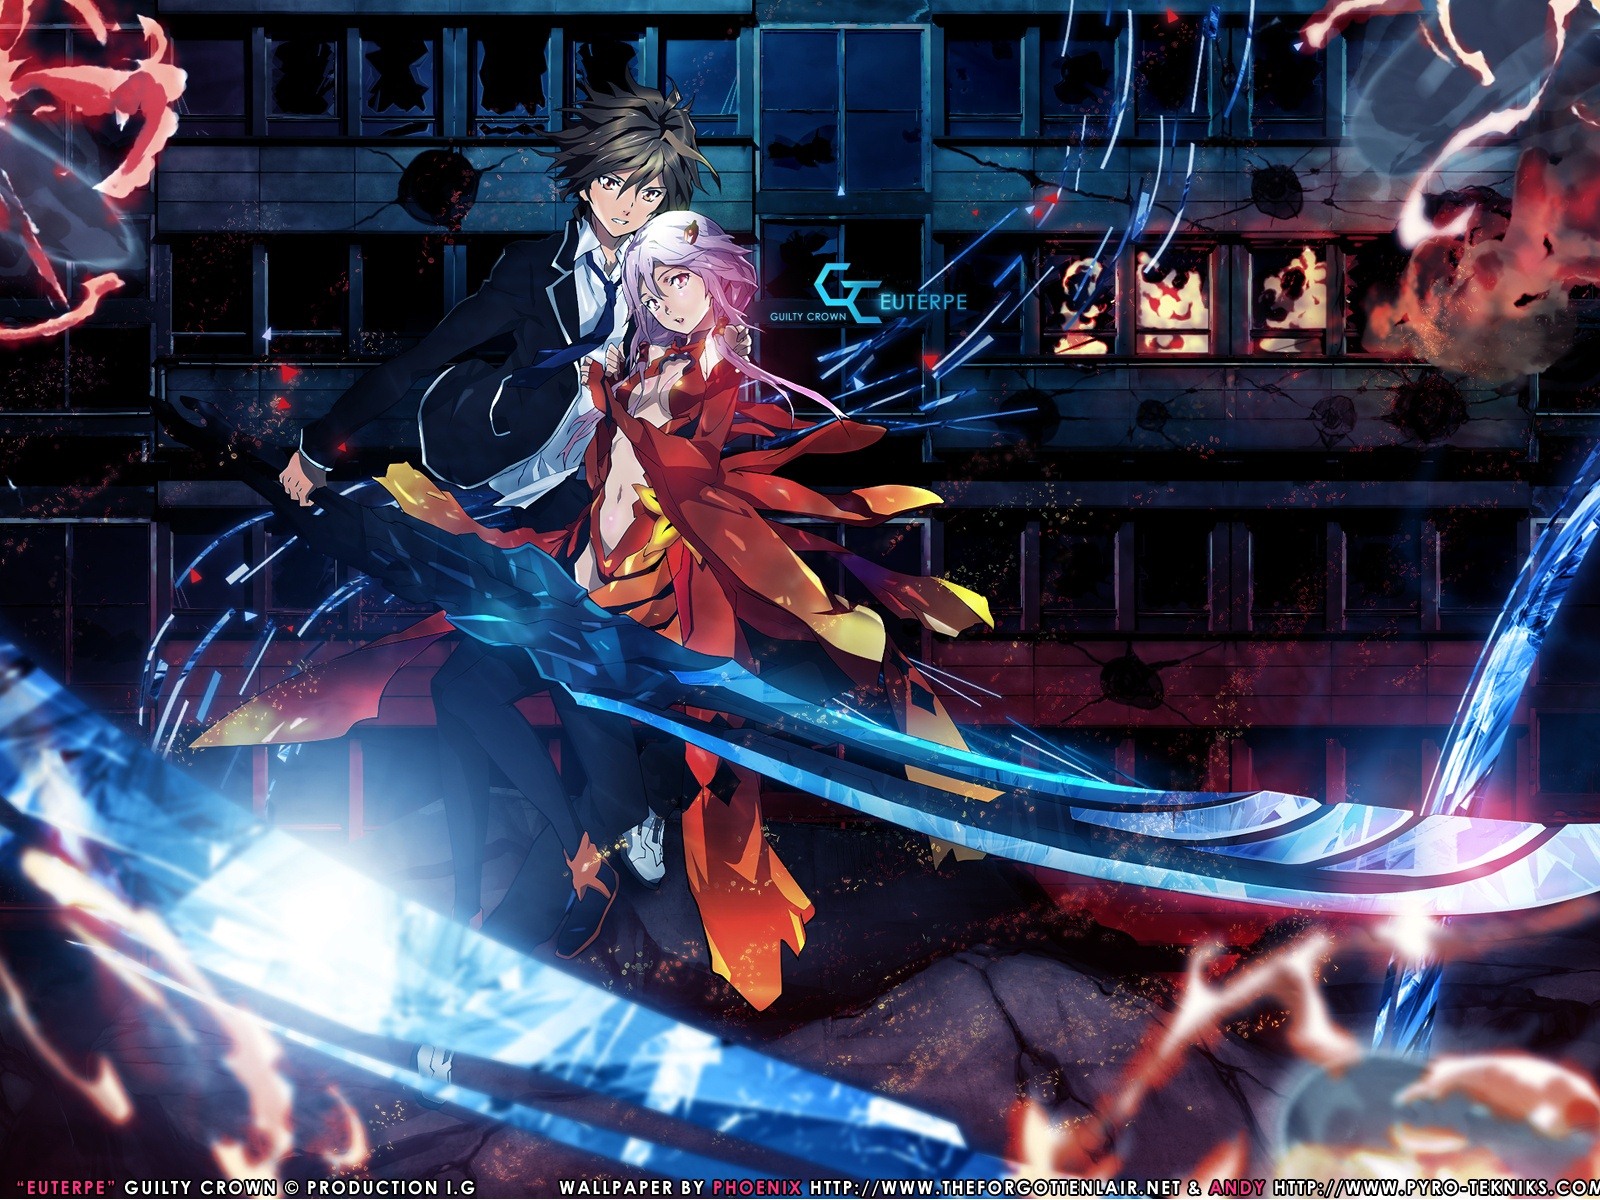 Guilty Crown 罪恶王冠 高清壁纸13 - 1600x1200